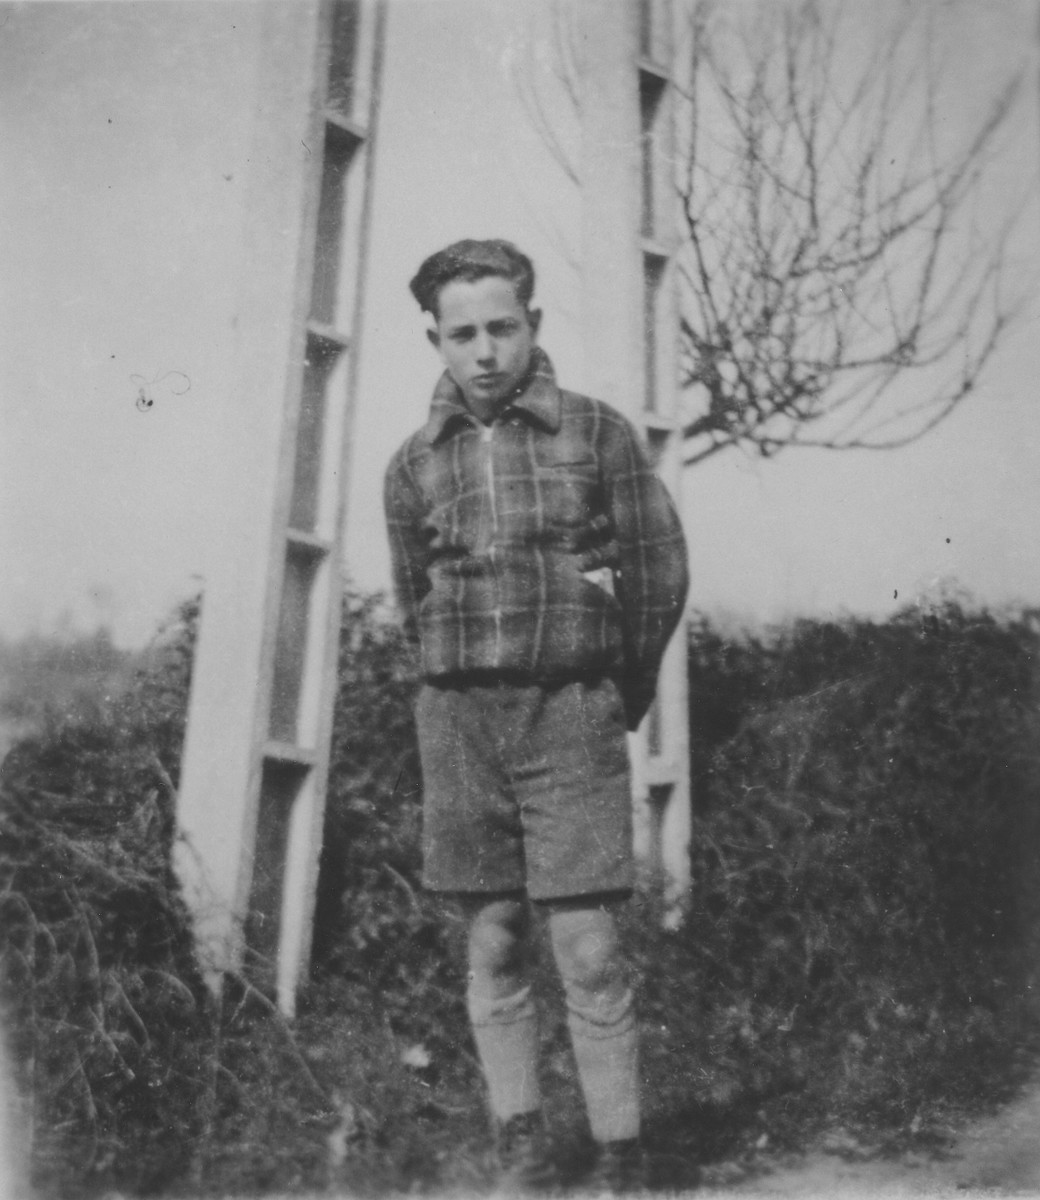 Portrait of the Jewish refugee child Gerard Alexander standing in front of the Chabannes children's home.